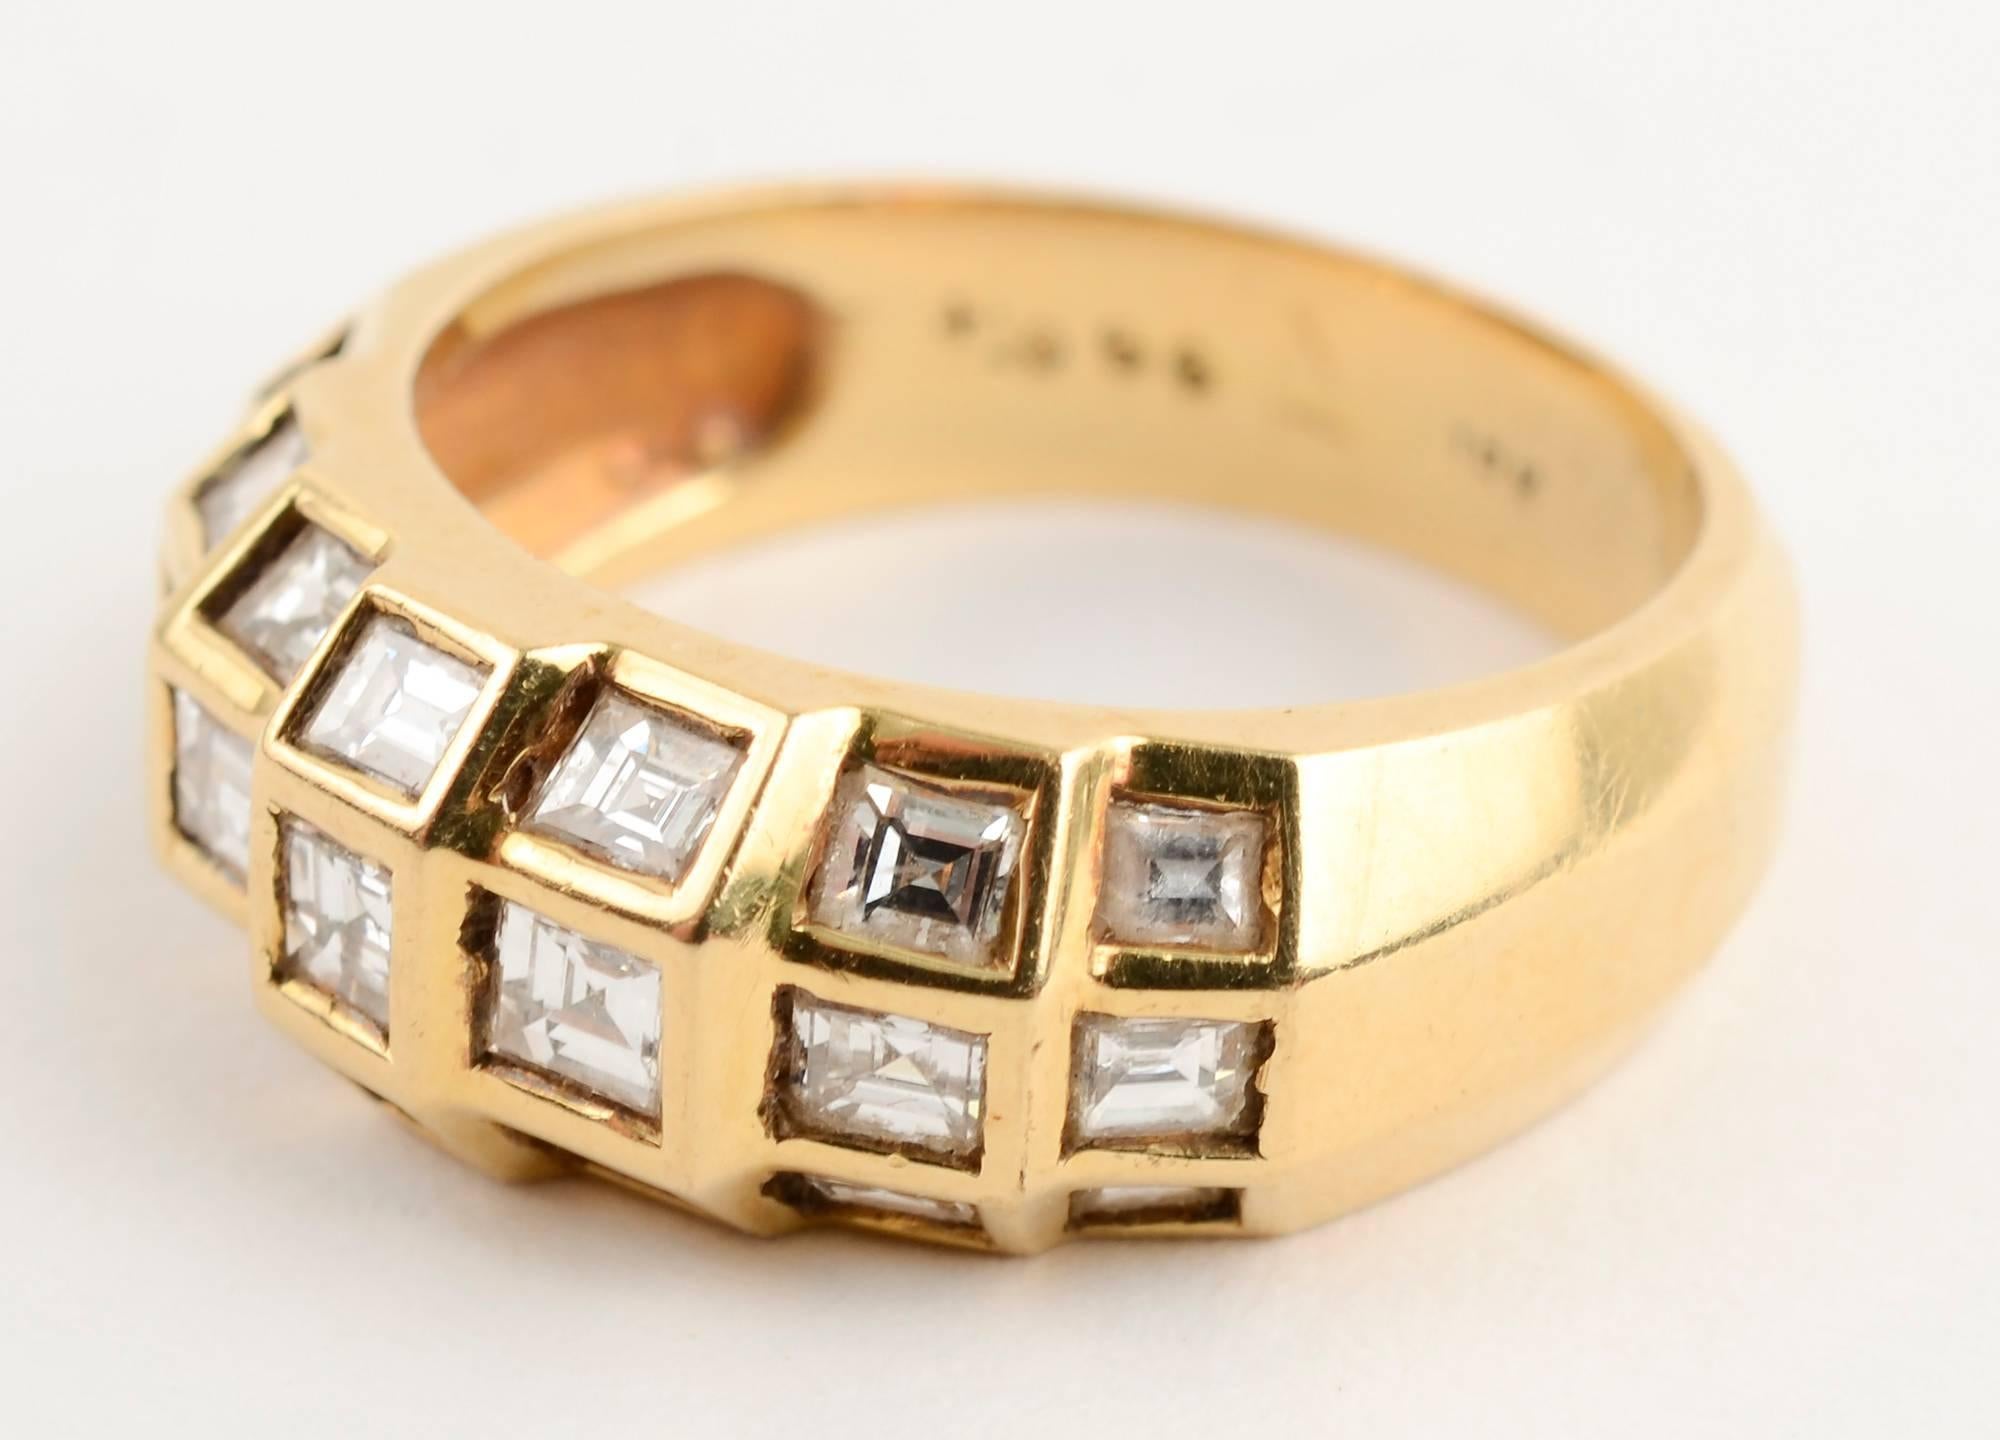 Modernist Gold Dome Ring with Diamonds